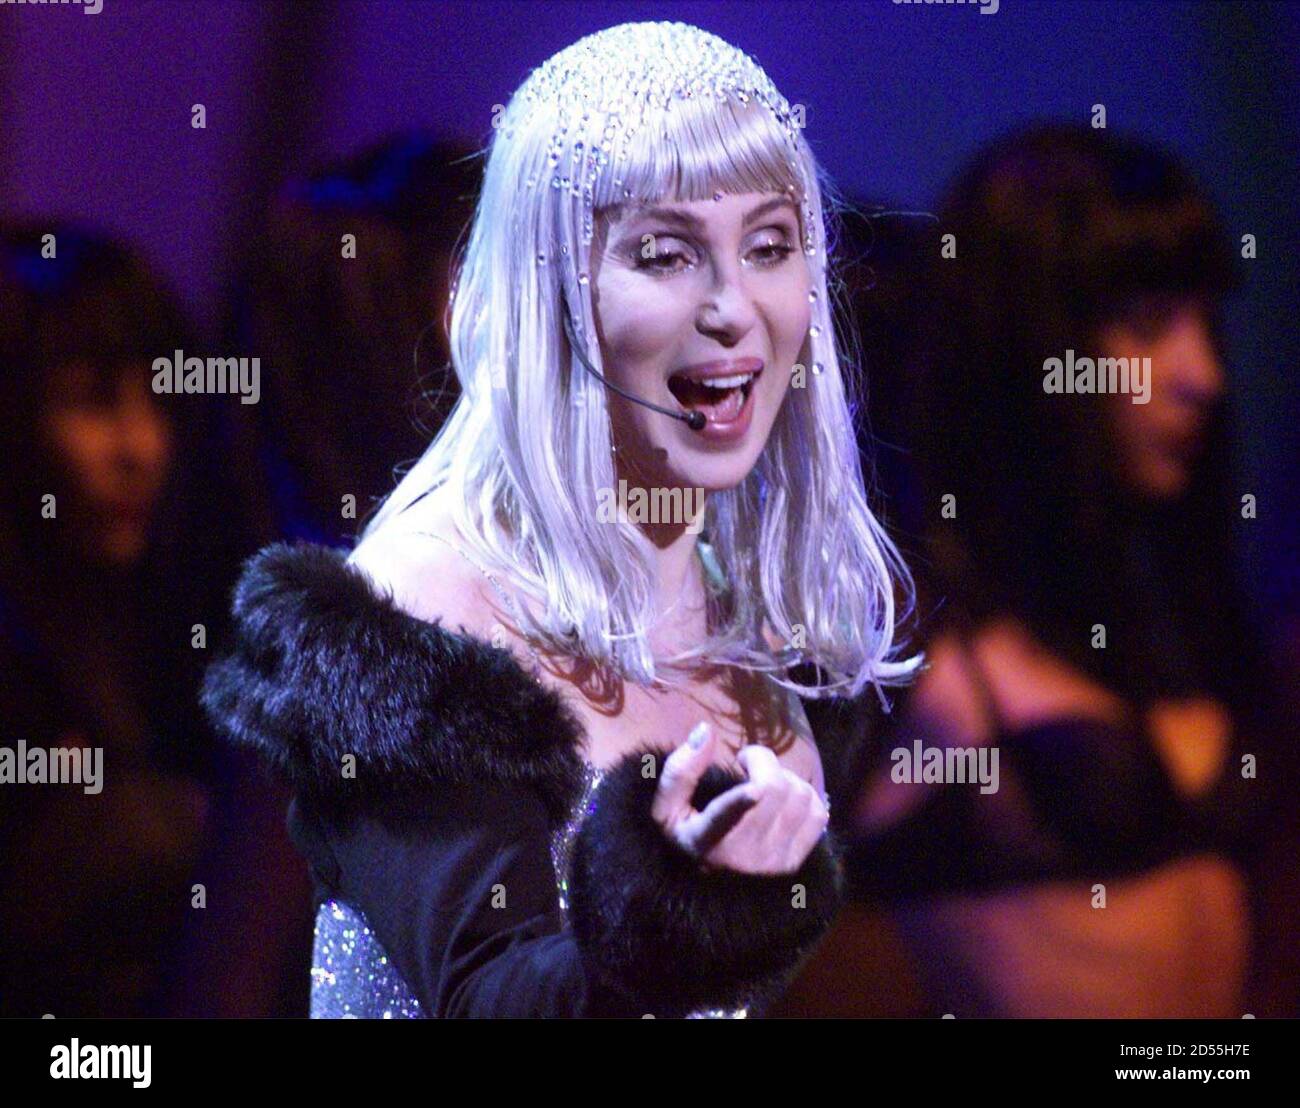 U.S. singer Cher performs at the annual Brit awards in the London Arena  February 16. [The awards were dominated by British pop-star Robbie Williams  who scooped a hat-trick of awards for Best